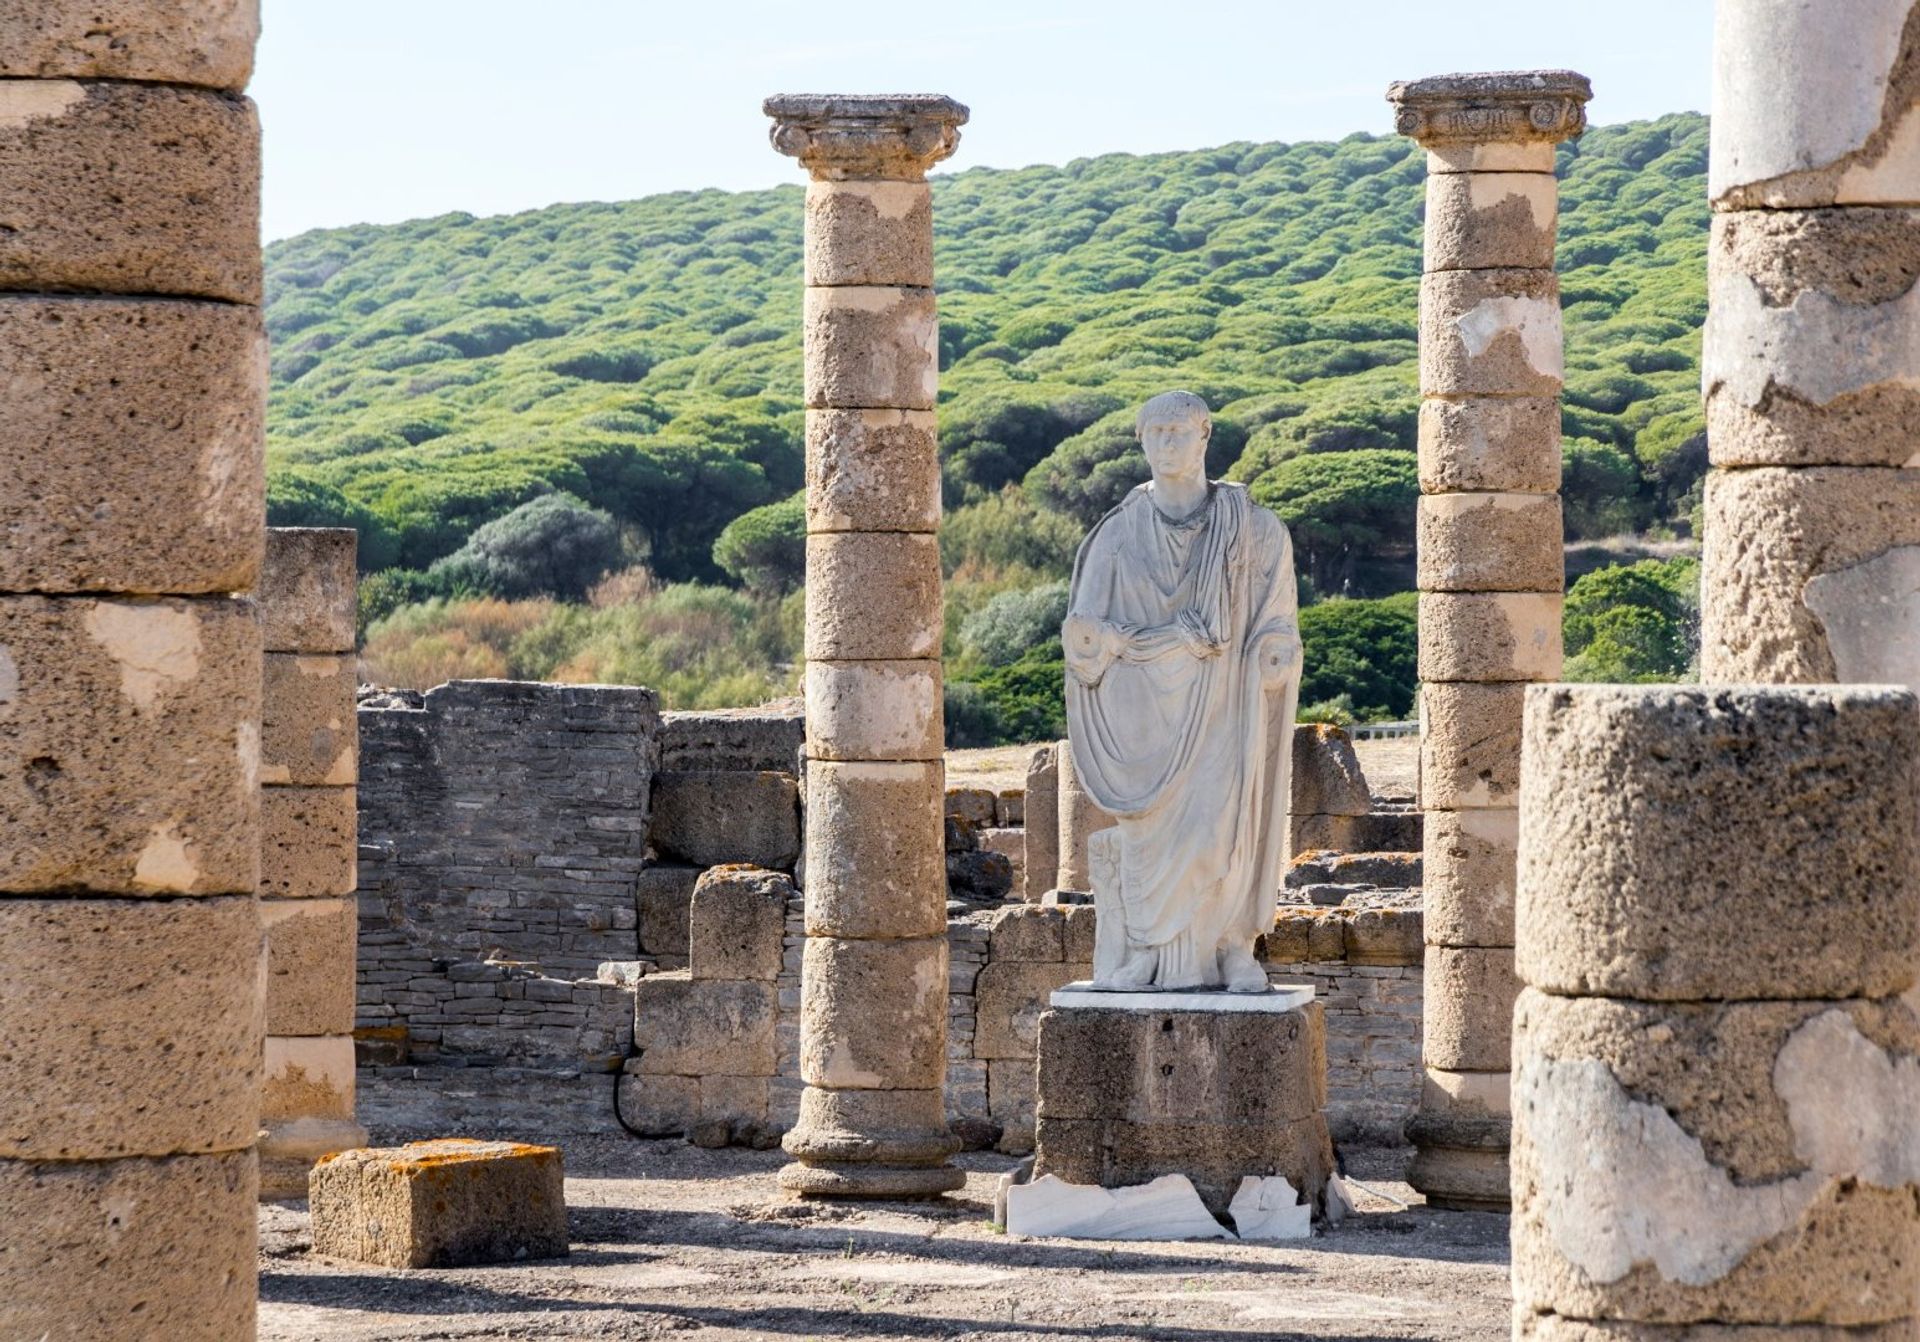 By Bolonia Beach lies the ruins of an ancient Roman town with its stone columns and statues